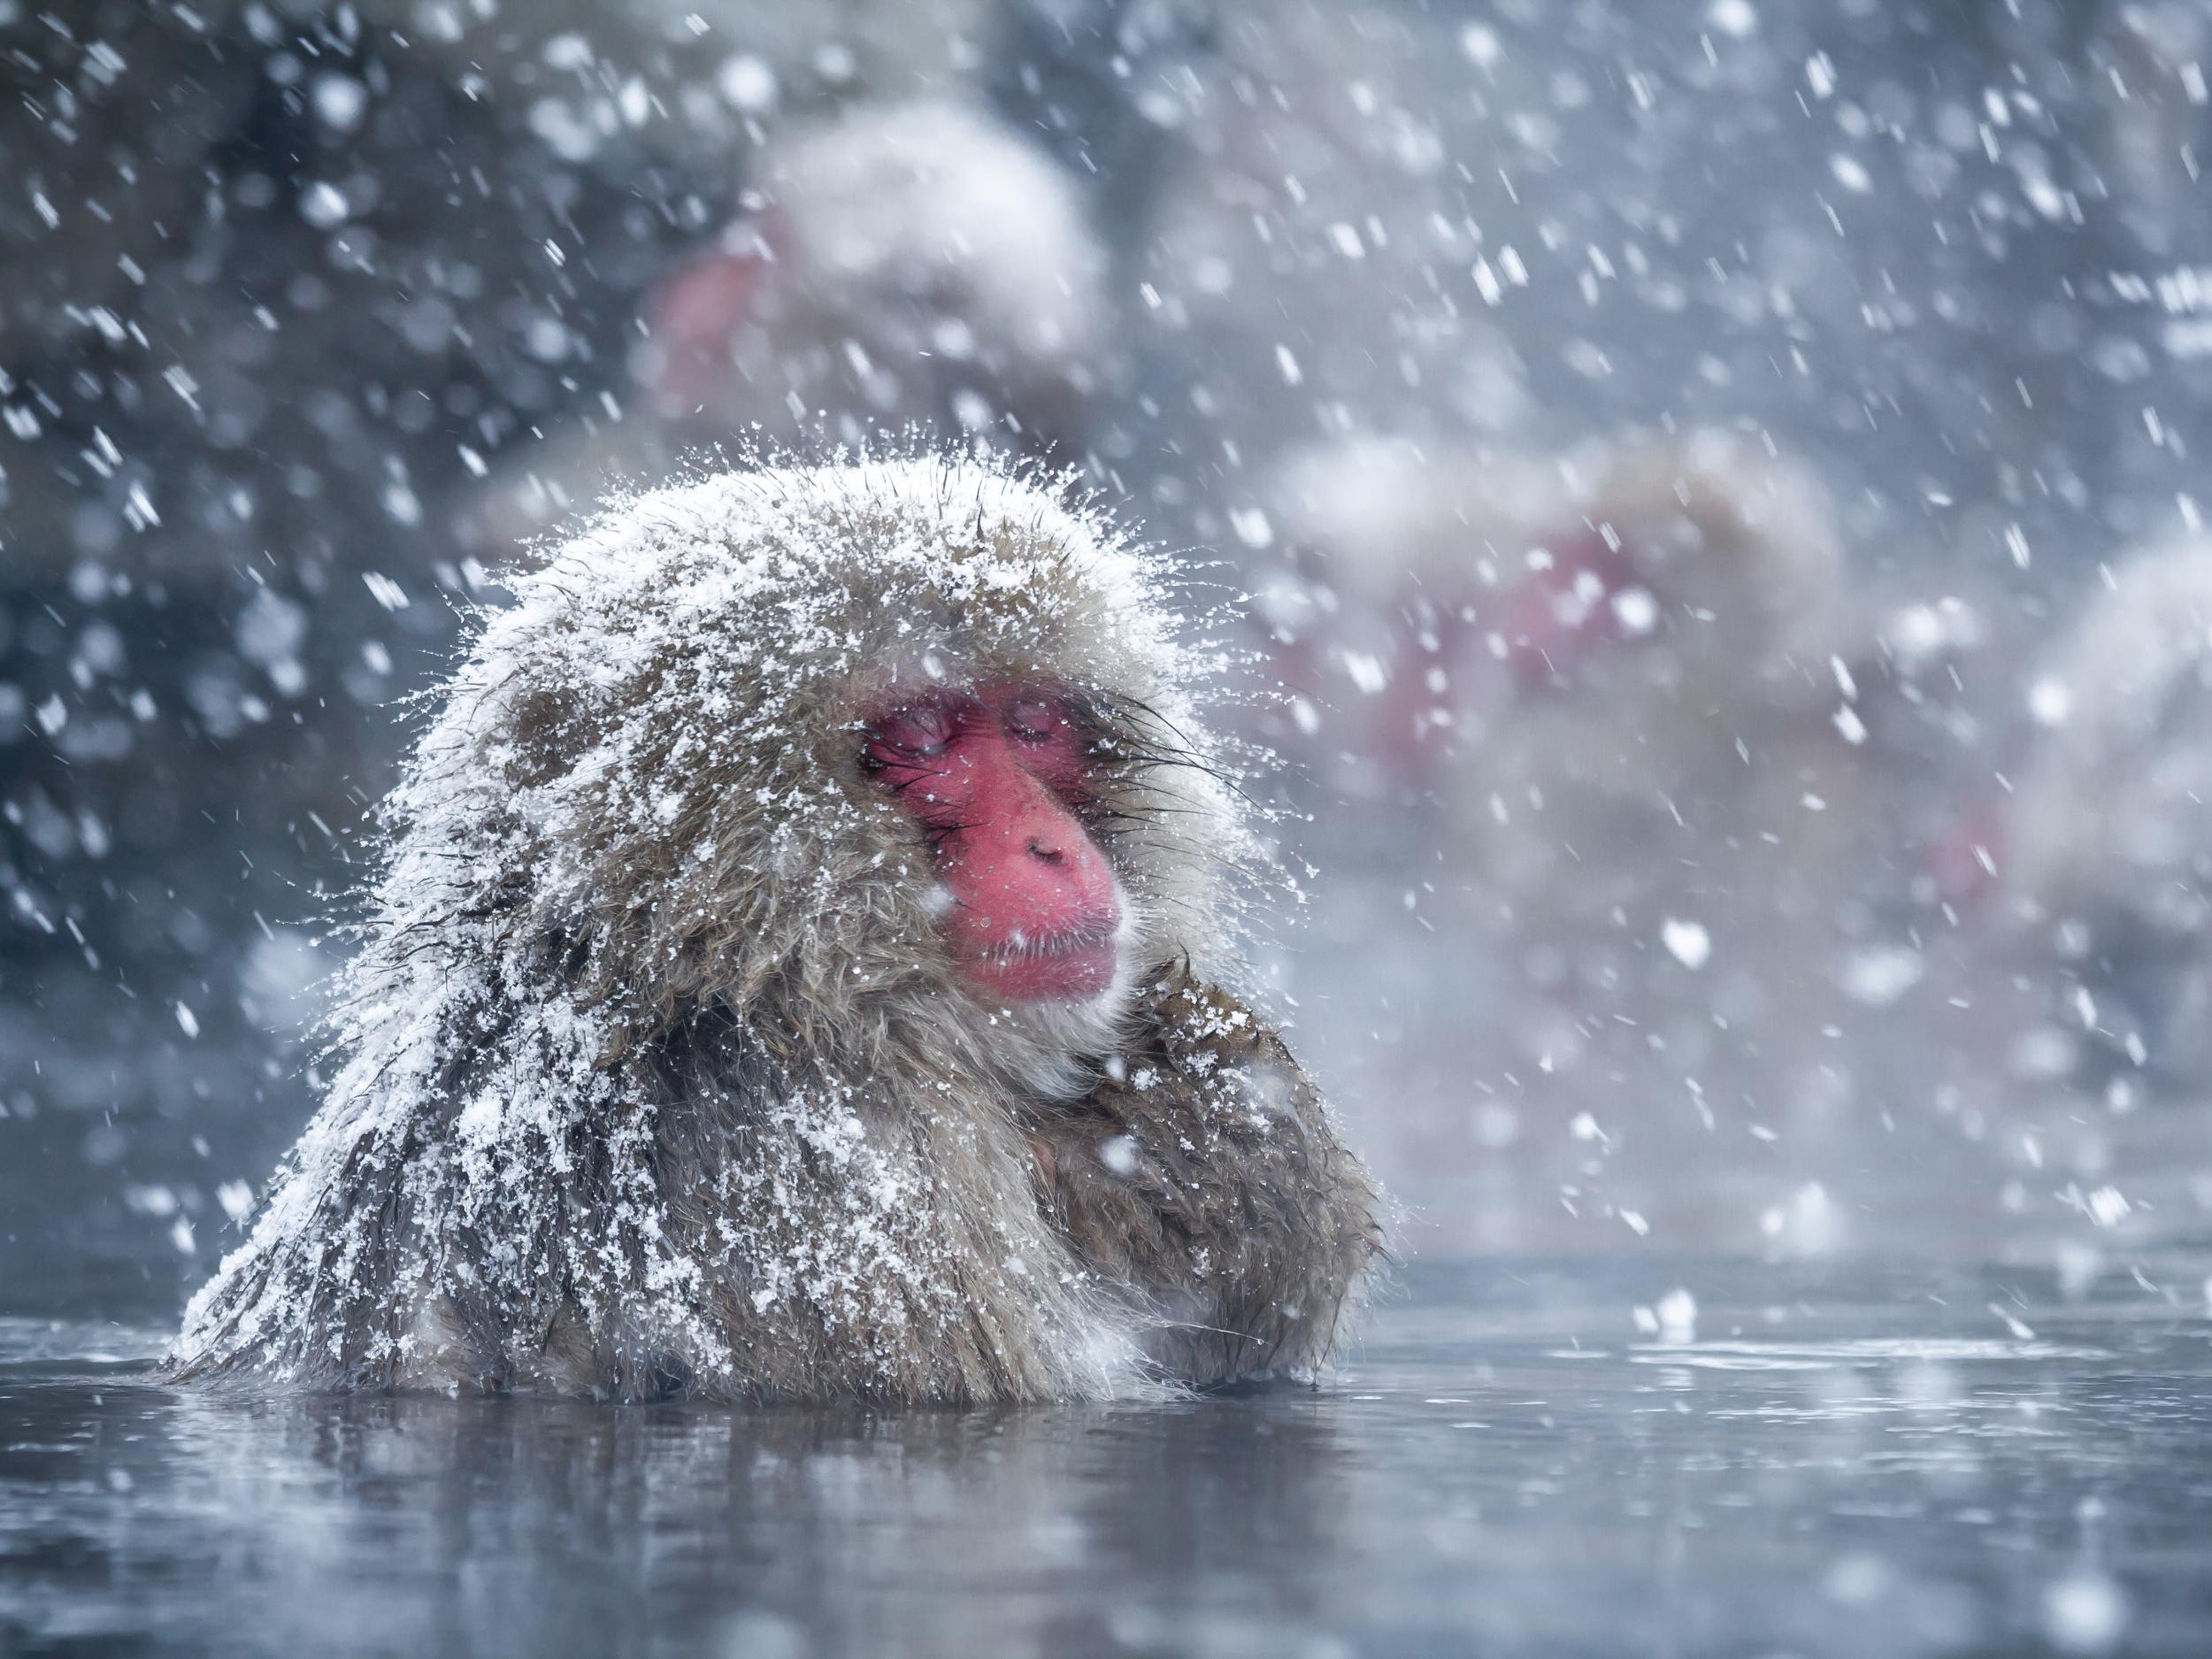 Japanese macaques are well known for taking baths in hot springs, and now researchers have confirmed they do this to de-stress, just like humans